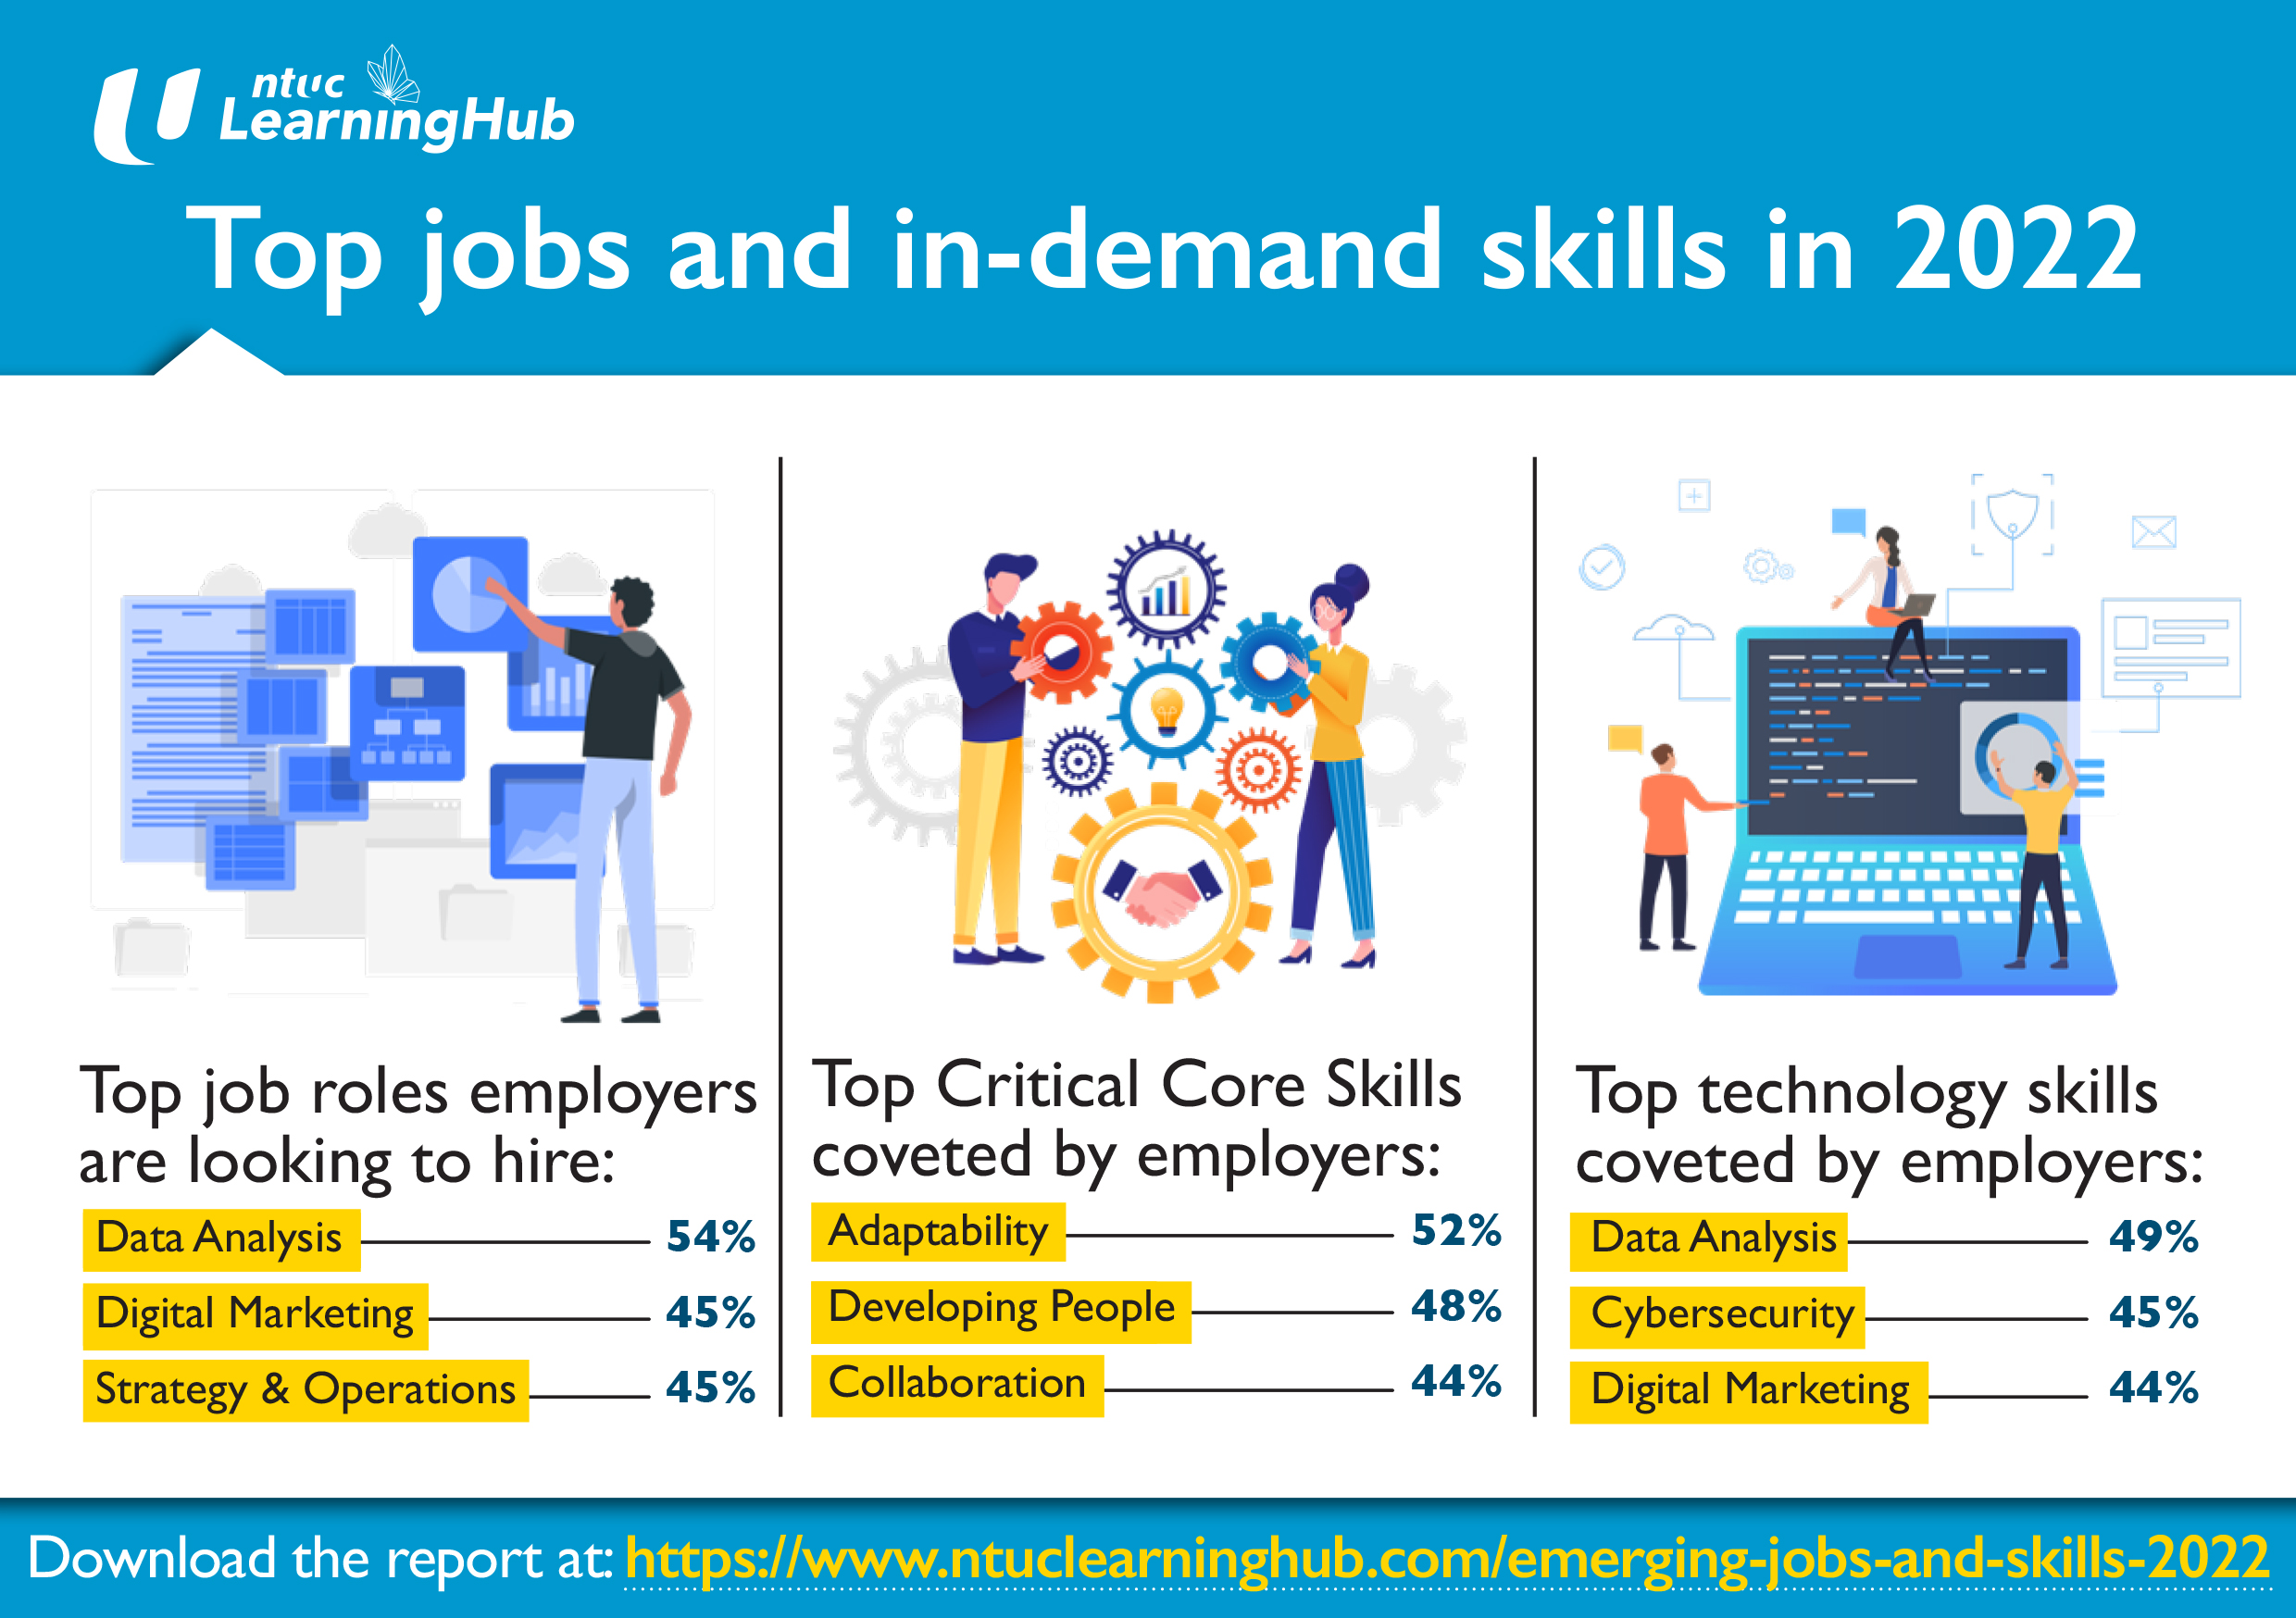 NTUC LearningHub’s ‘Emerging Jobs And Skills’ Report Reveals Top Jobs And In-Demand Skills In 2022